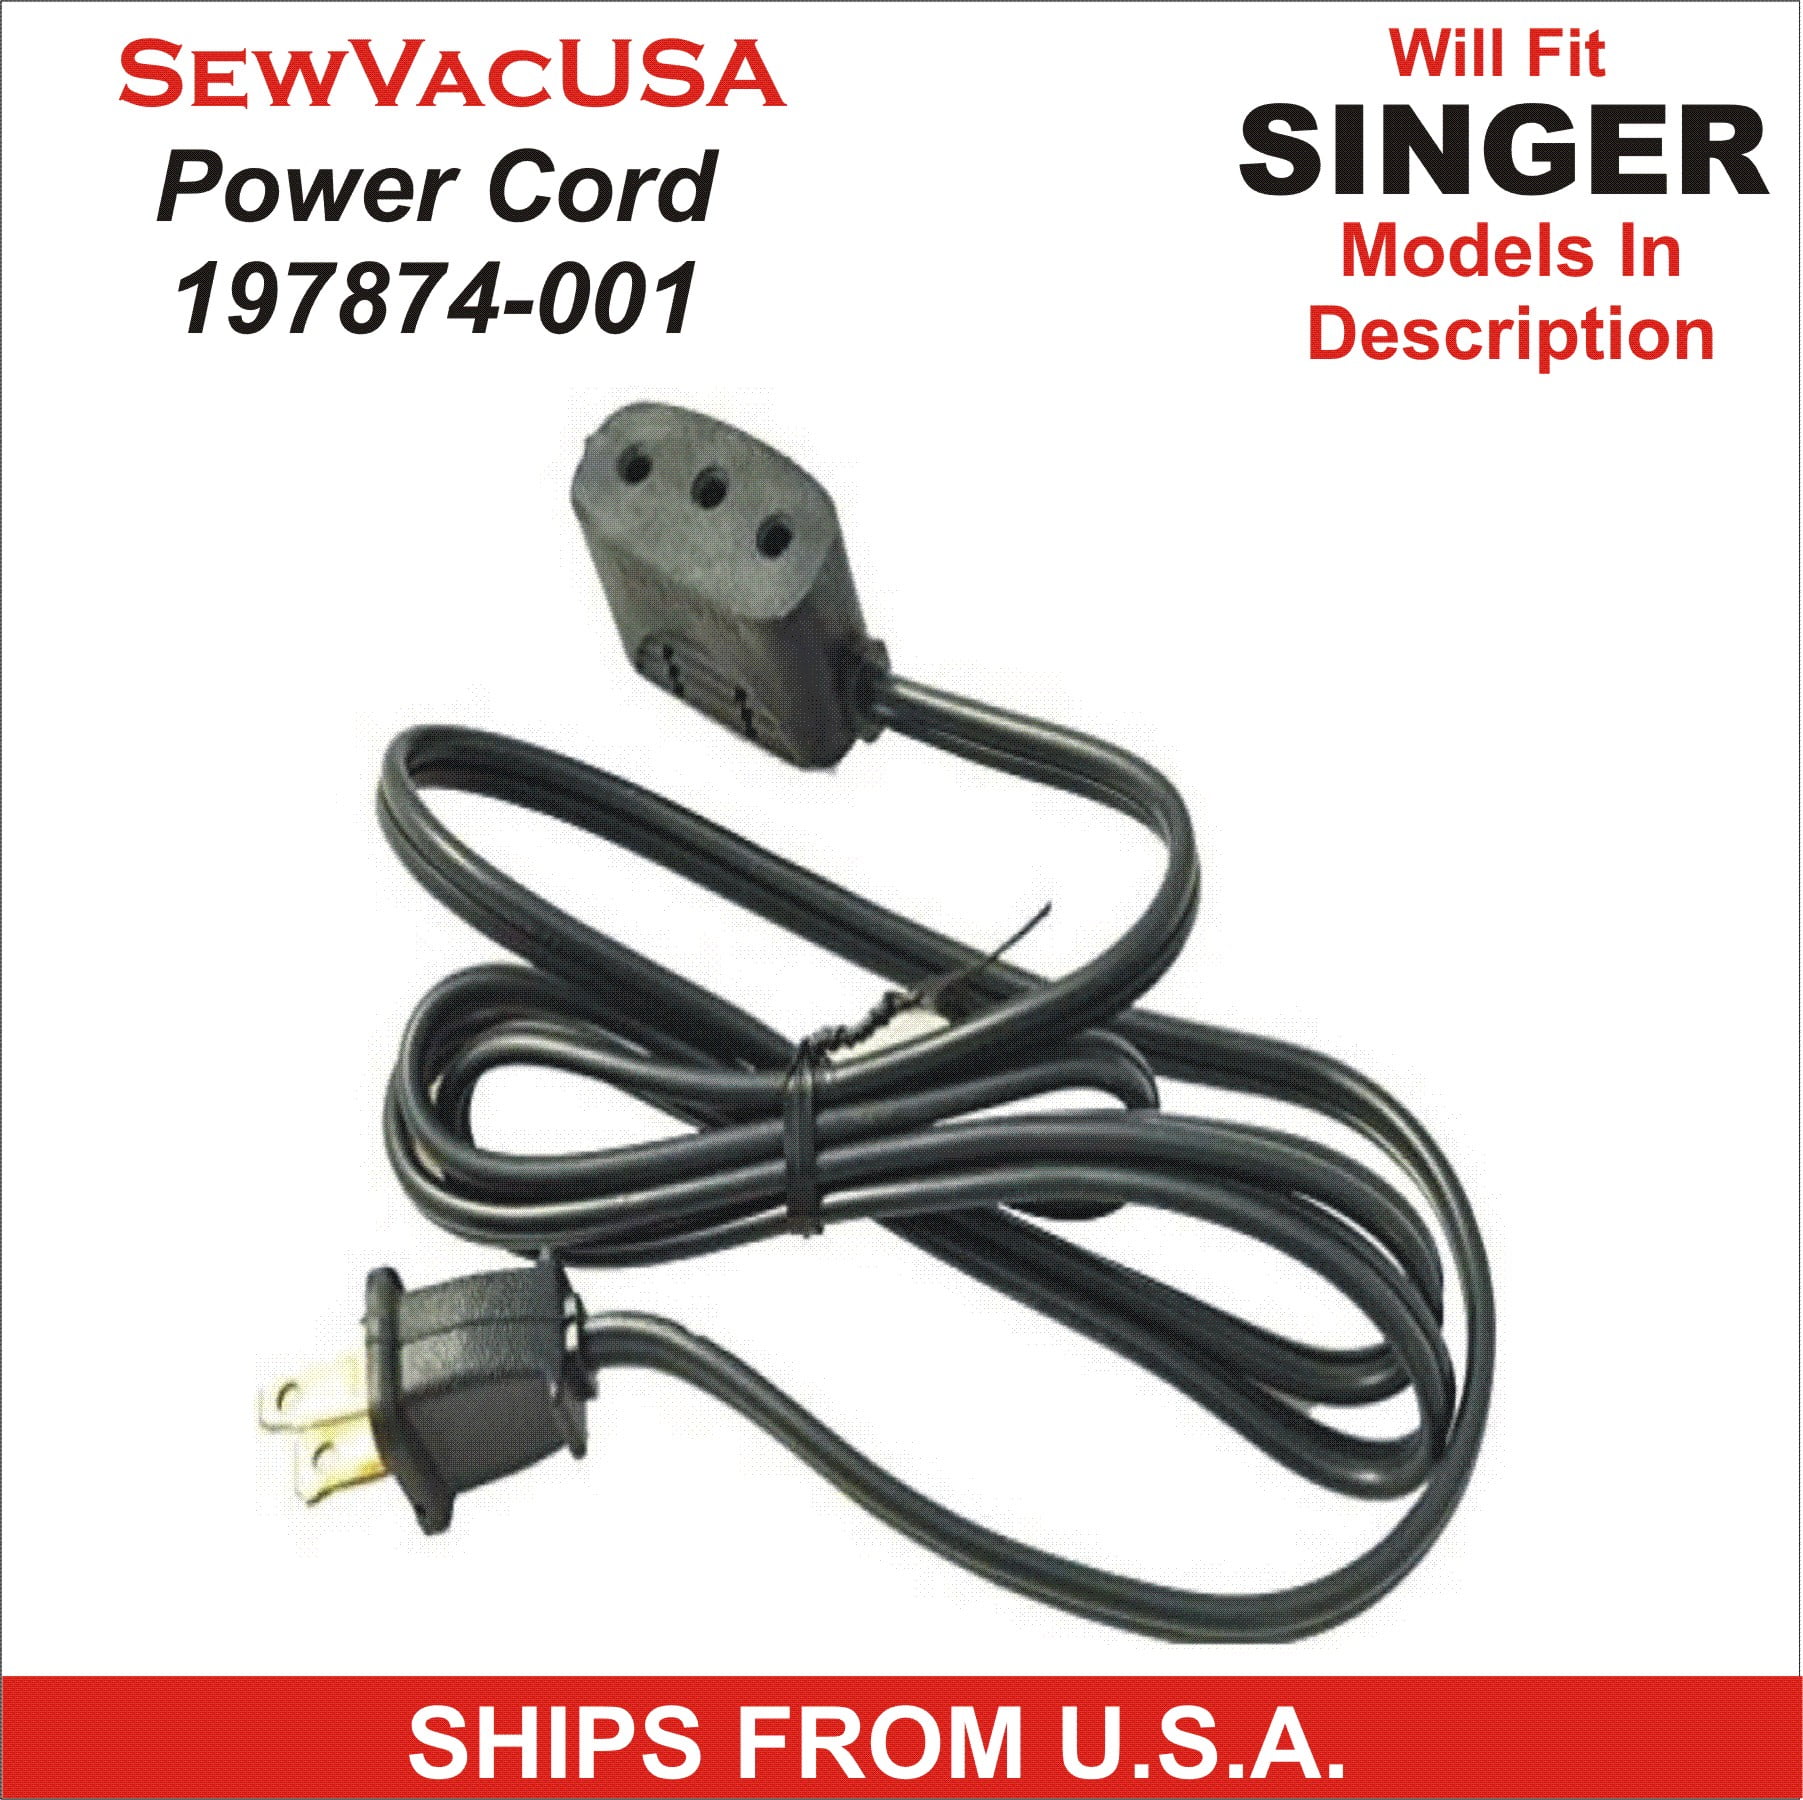 1120 POWER LEAD CORD #771 fits SINGER 1105 1525 1116 1130 